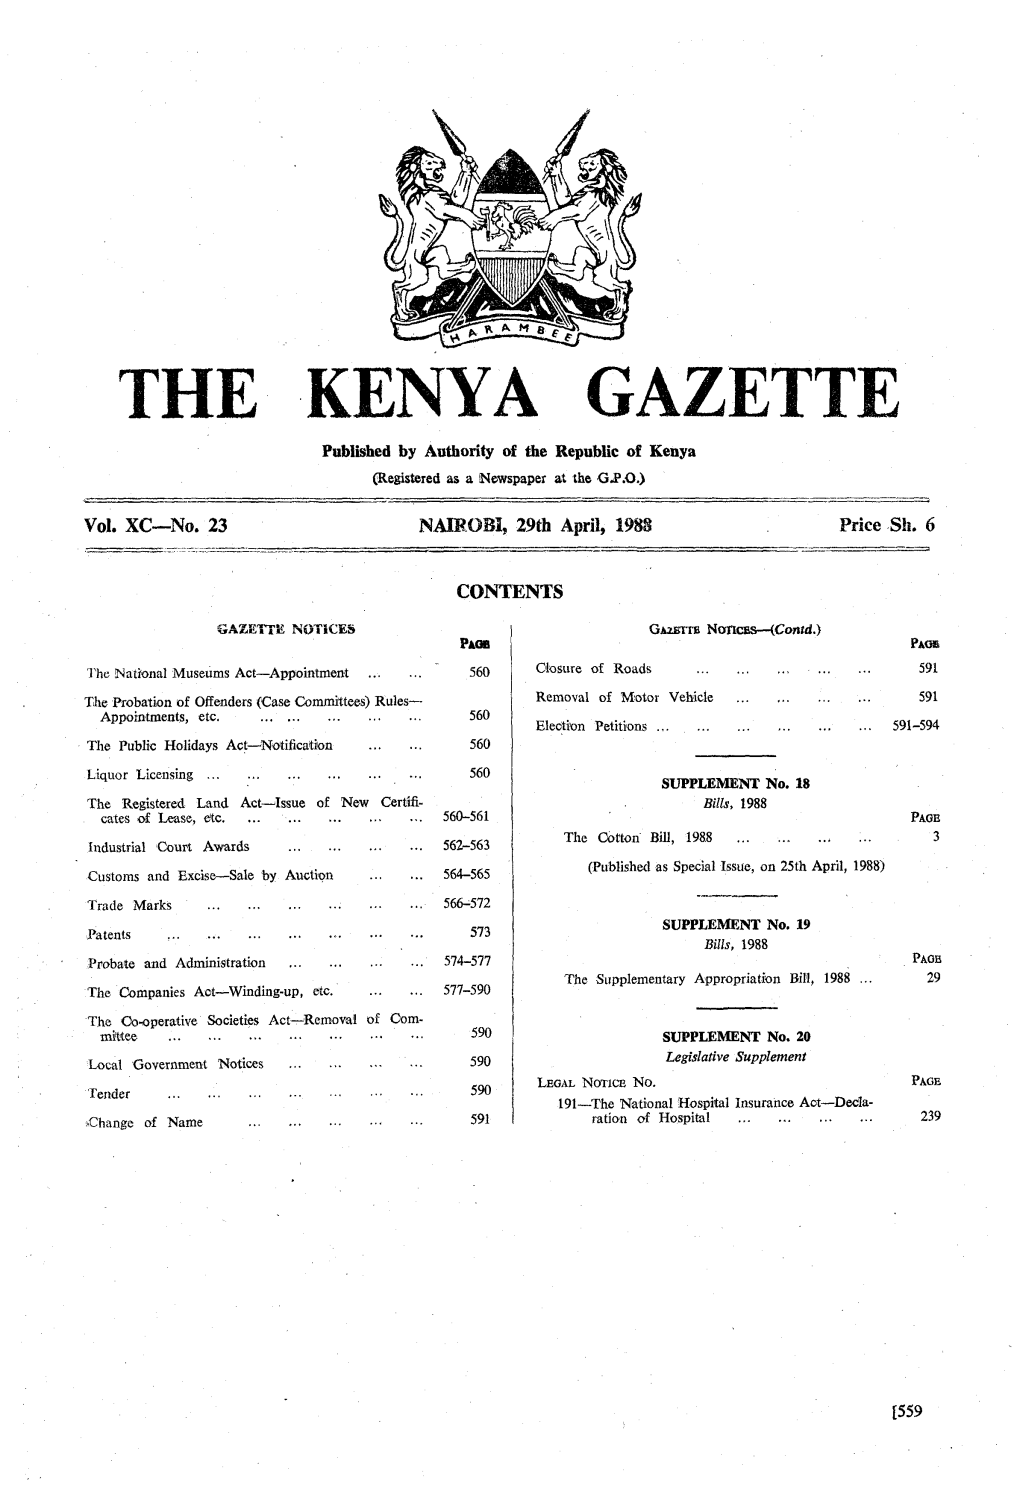 The Kenya Gazettes Whcse Gartitulars Drie,D Aad Xoko Fruits Ané Vegetables; 'Pllies, Jams, Eggs, Are Given Above